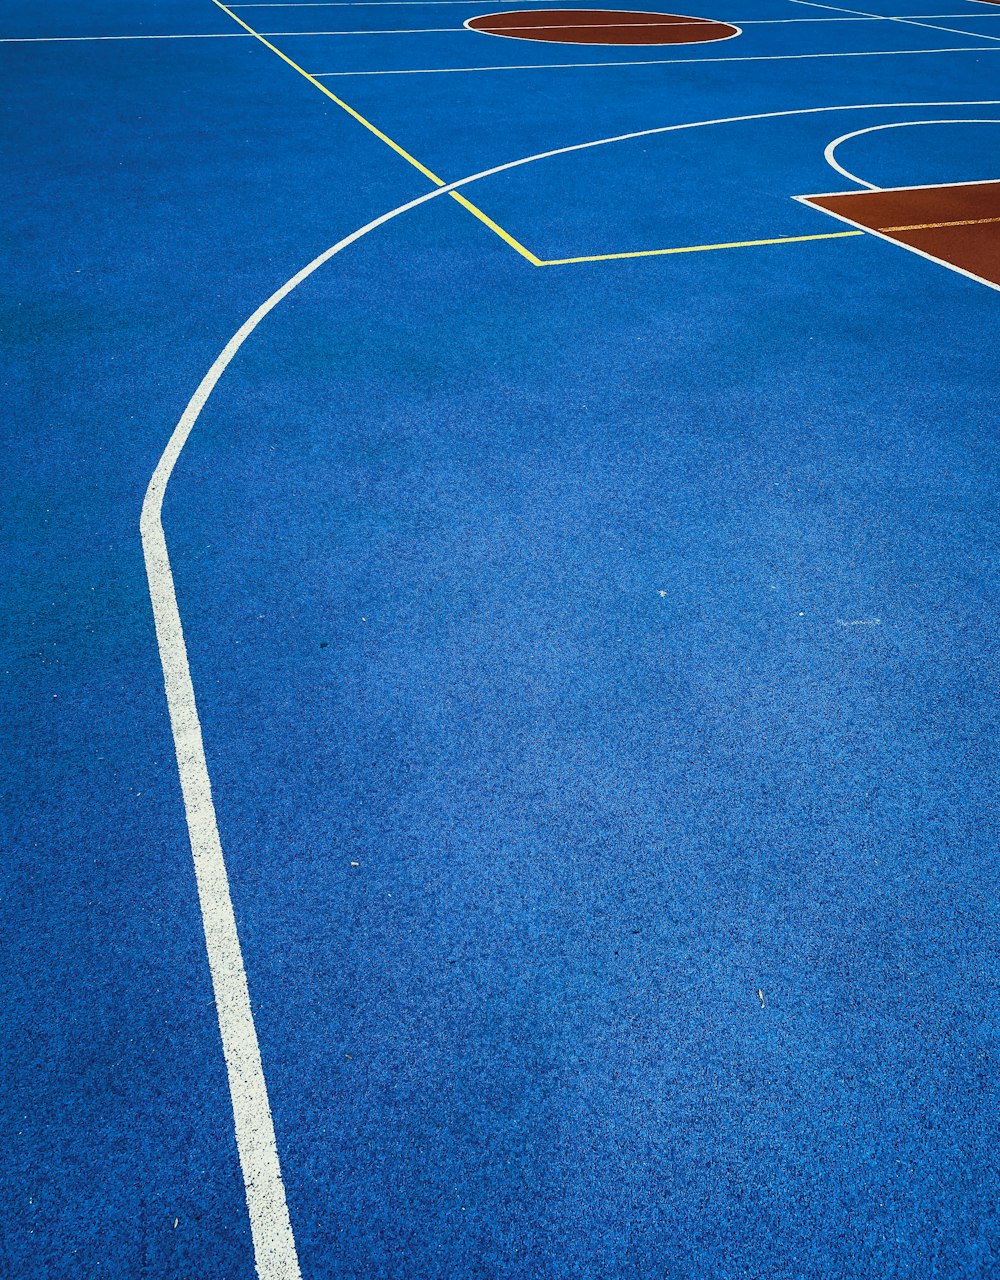 a blue basketball court with white lines on it